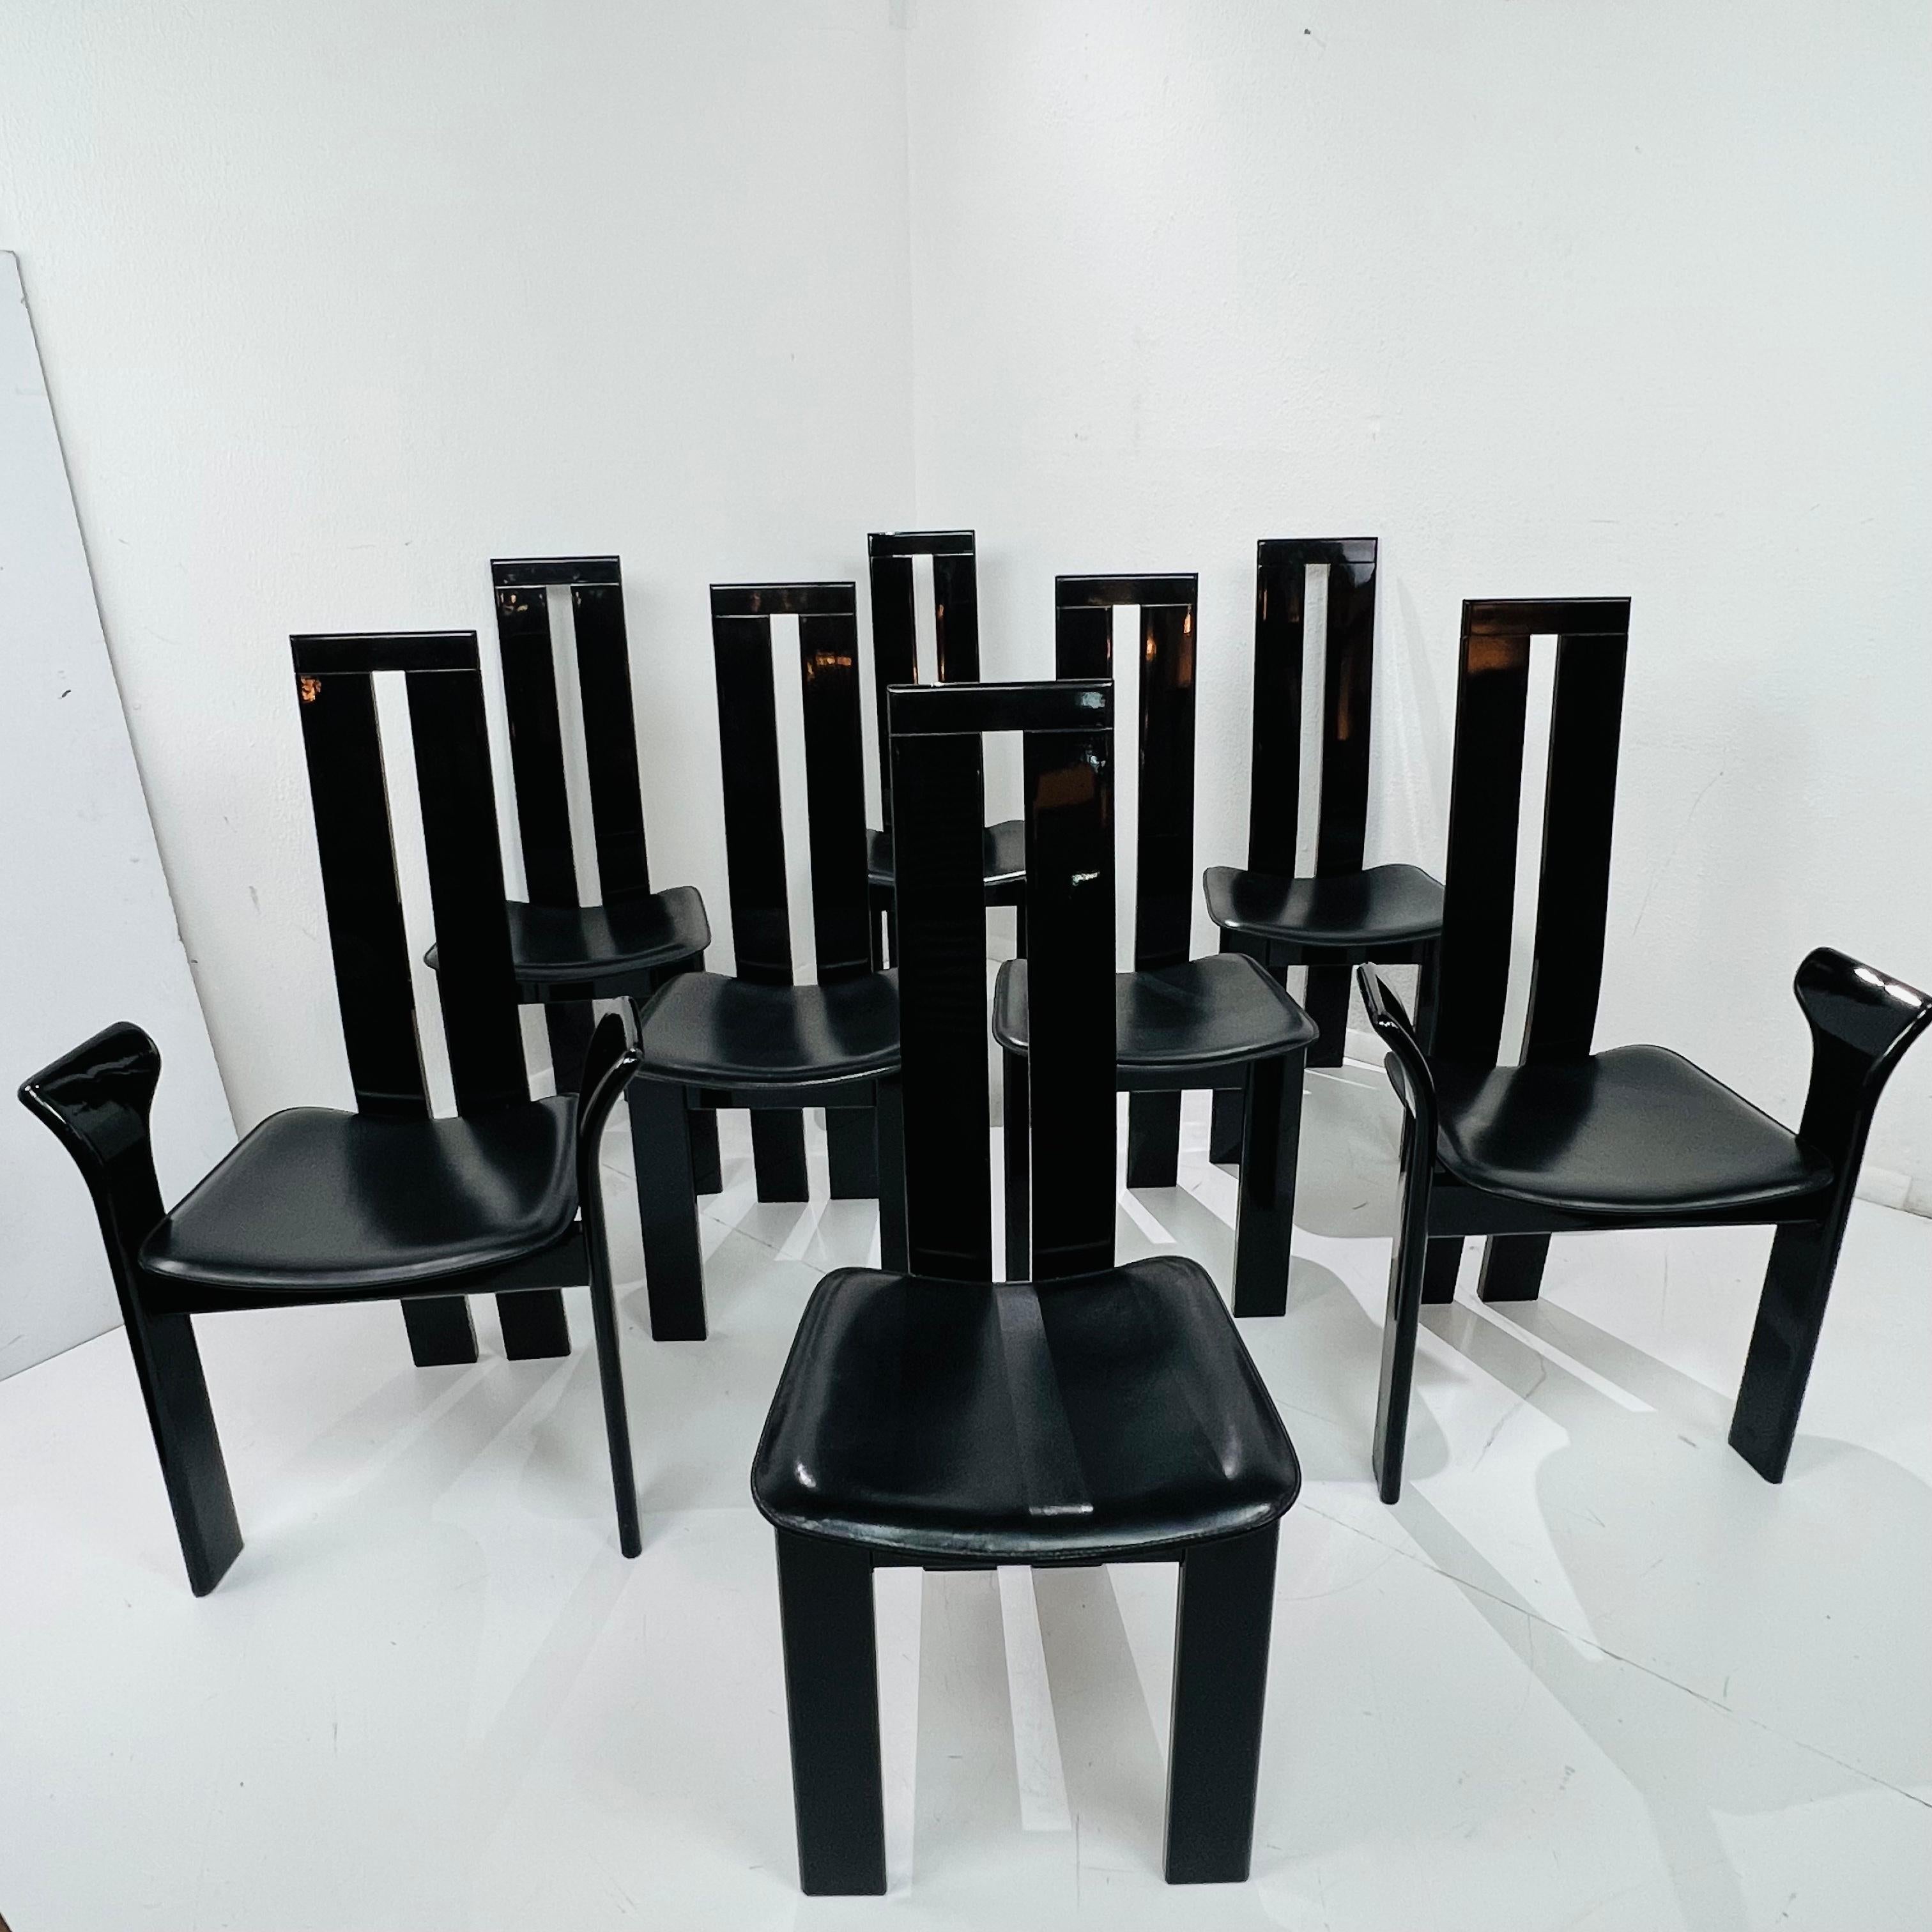 Chic set of post modern dining chairs designed by Pietro Costantini in San Vito al Torre Italy. The iconic chairs feature sculptural style piano black lacquered frames with conforming black leather seat pads. The set consists of six side chairs and